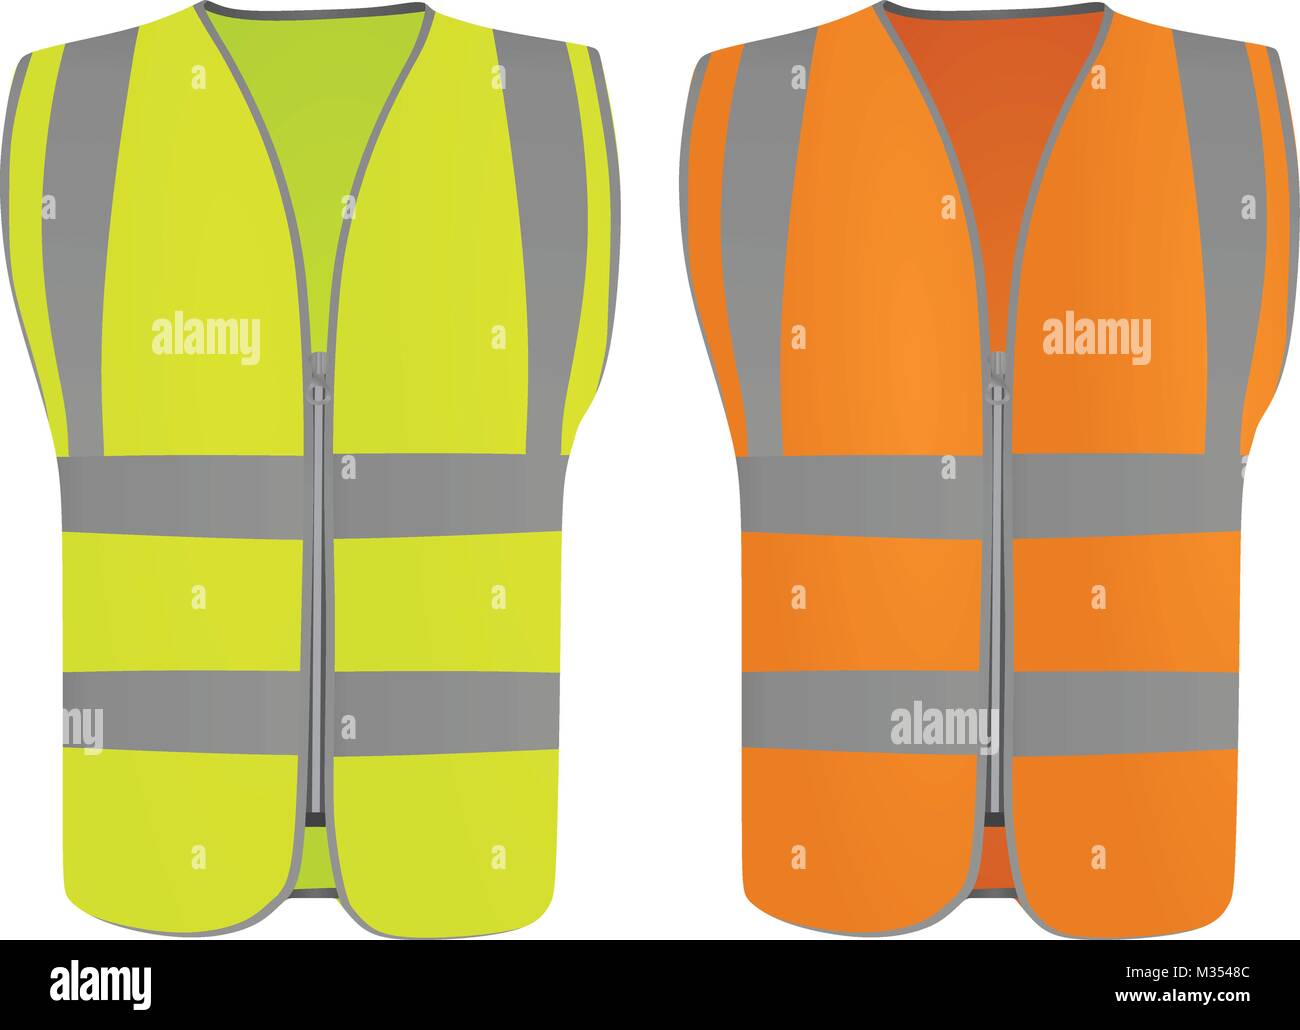 Safety yellow and orange vests. vector illustration Stock Vector